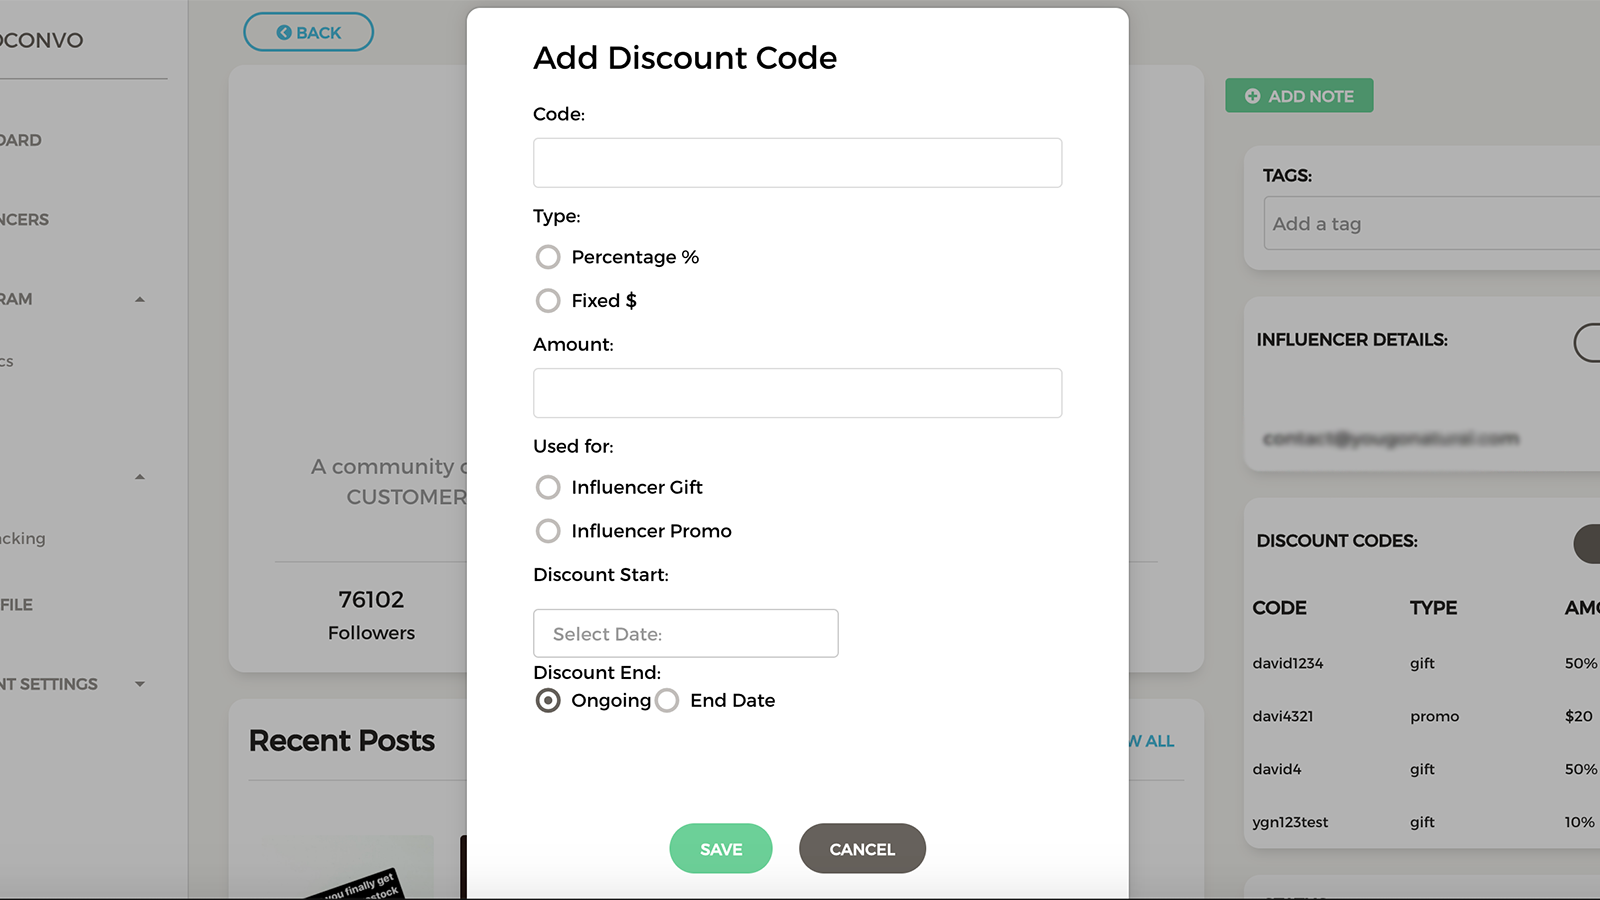 We create and share Discount Codes with your influencers. 